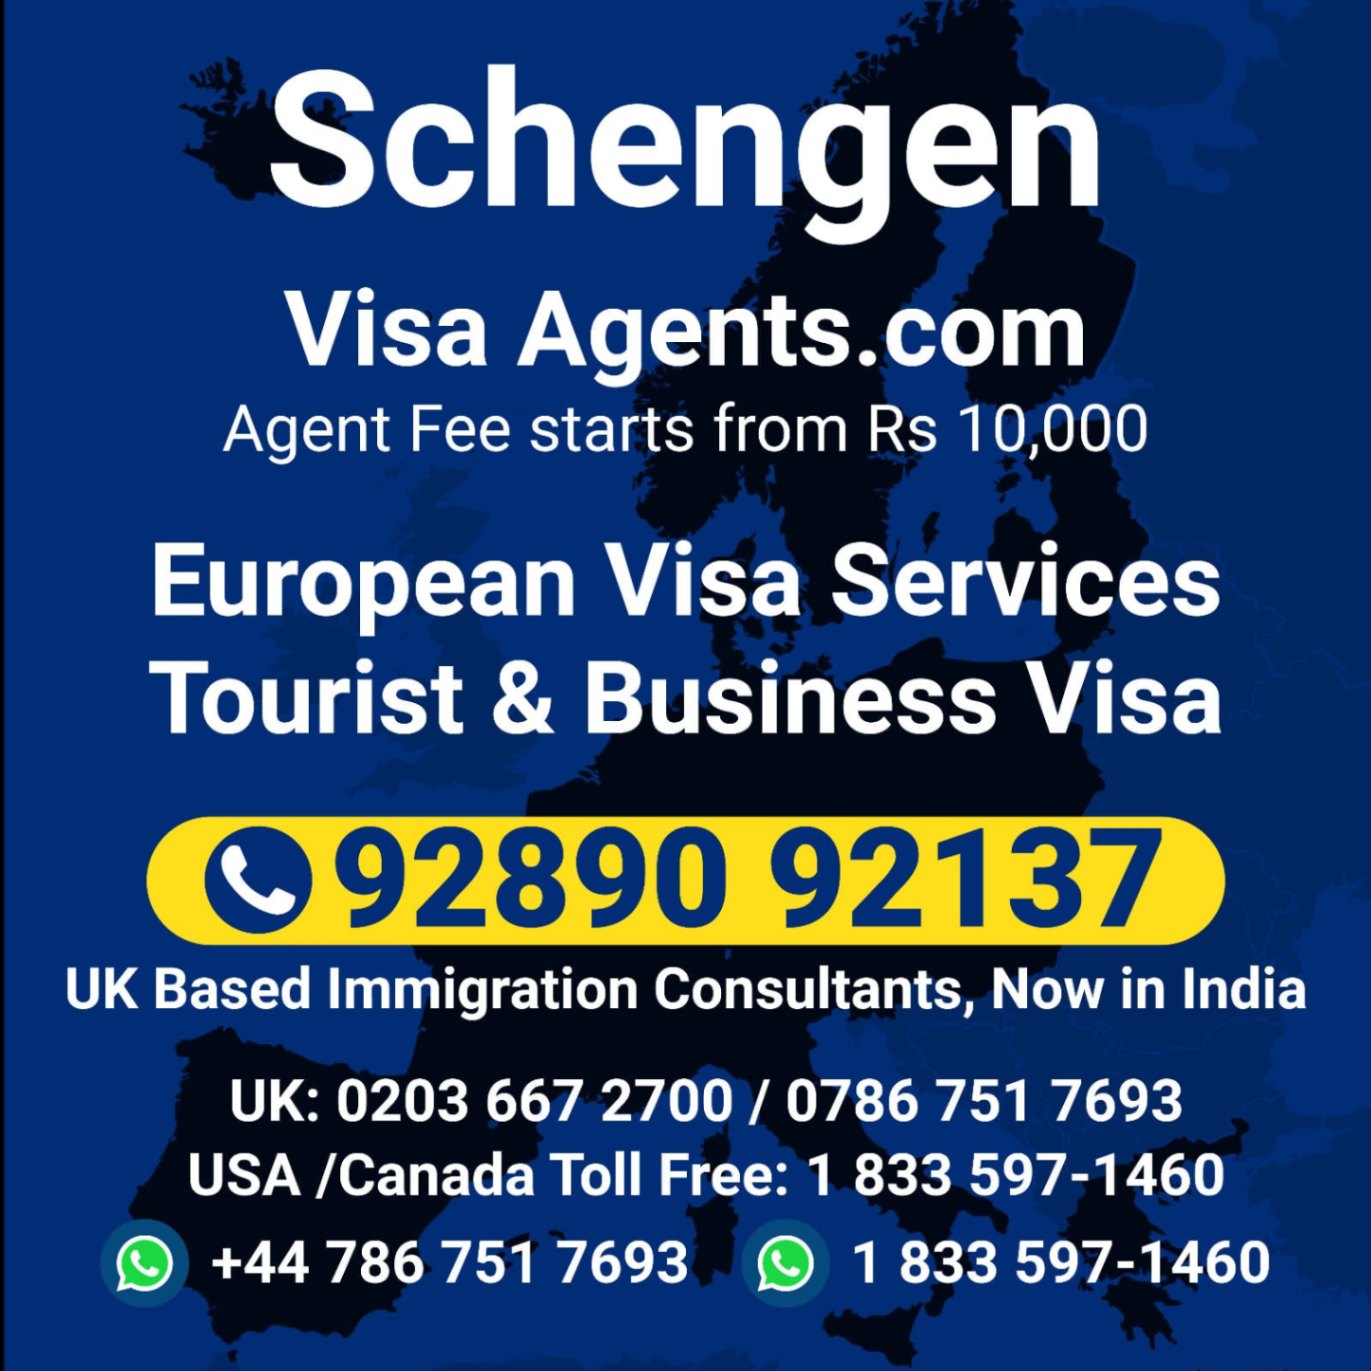 Travel agents; Exp: More than 5 year